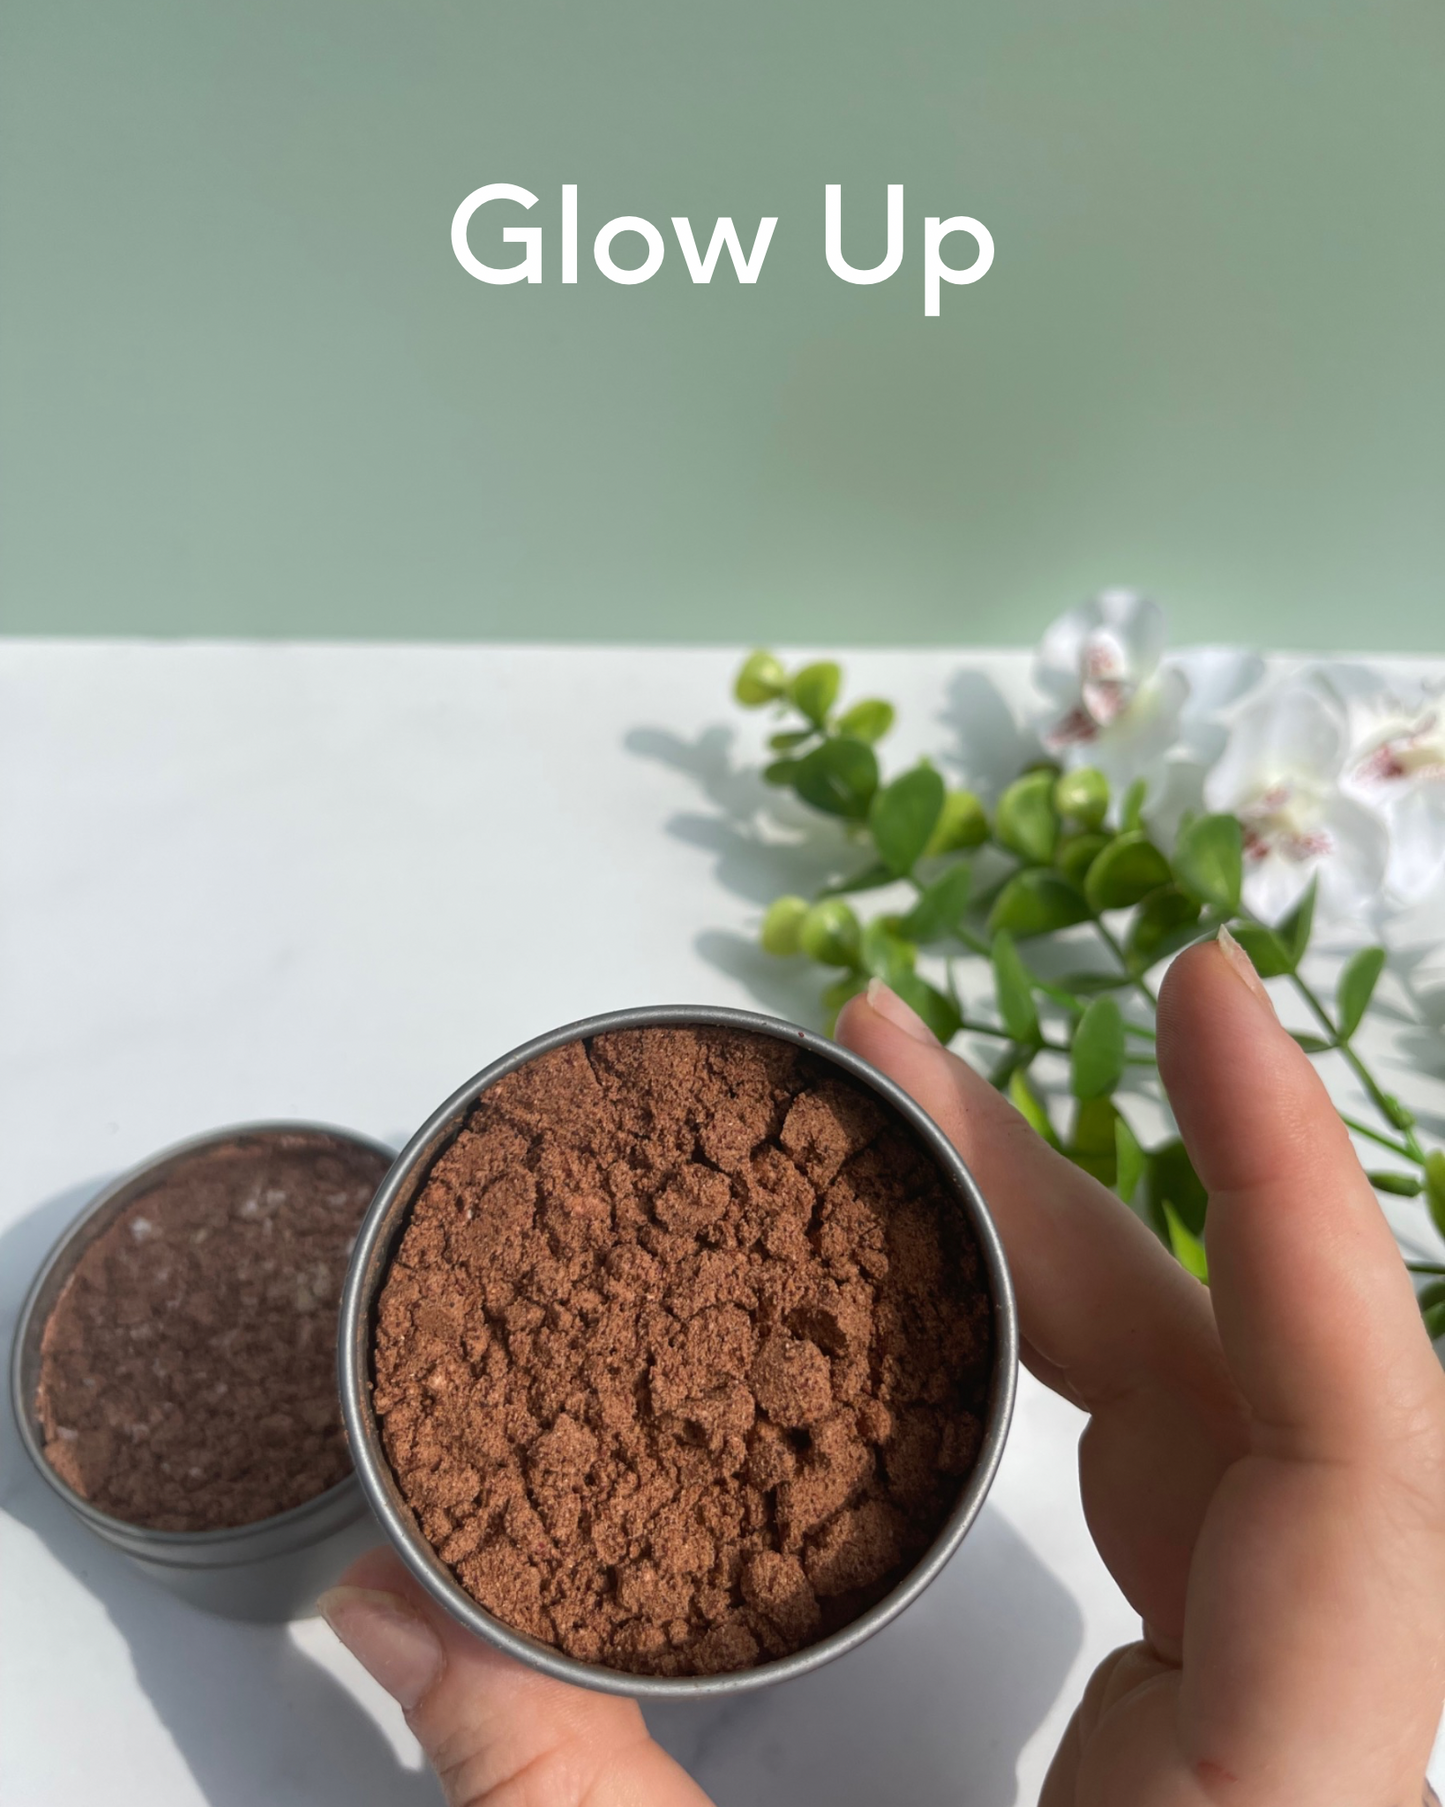 Reads: Glow UP. Foreground : hand holding metal tin containing herbal blend. Background: 2 metal tins containing herb blends sitting on marble counter next to flowers